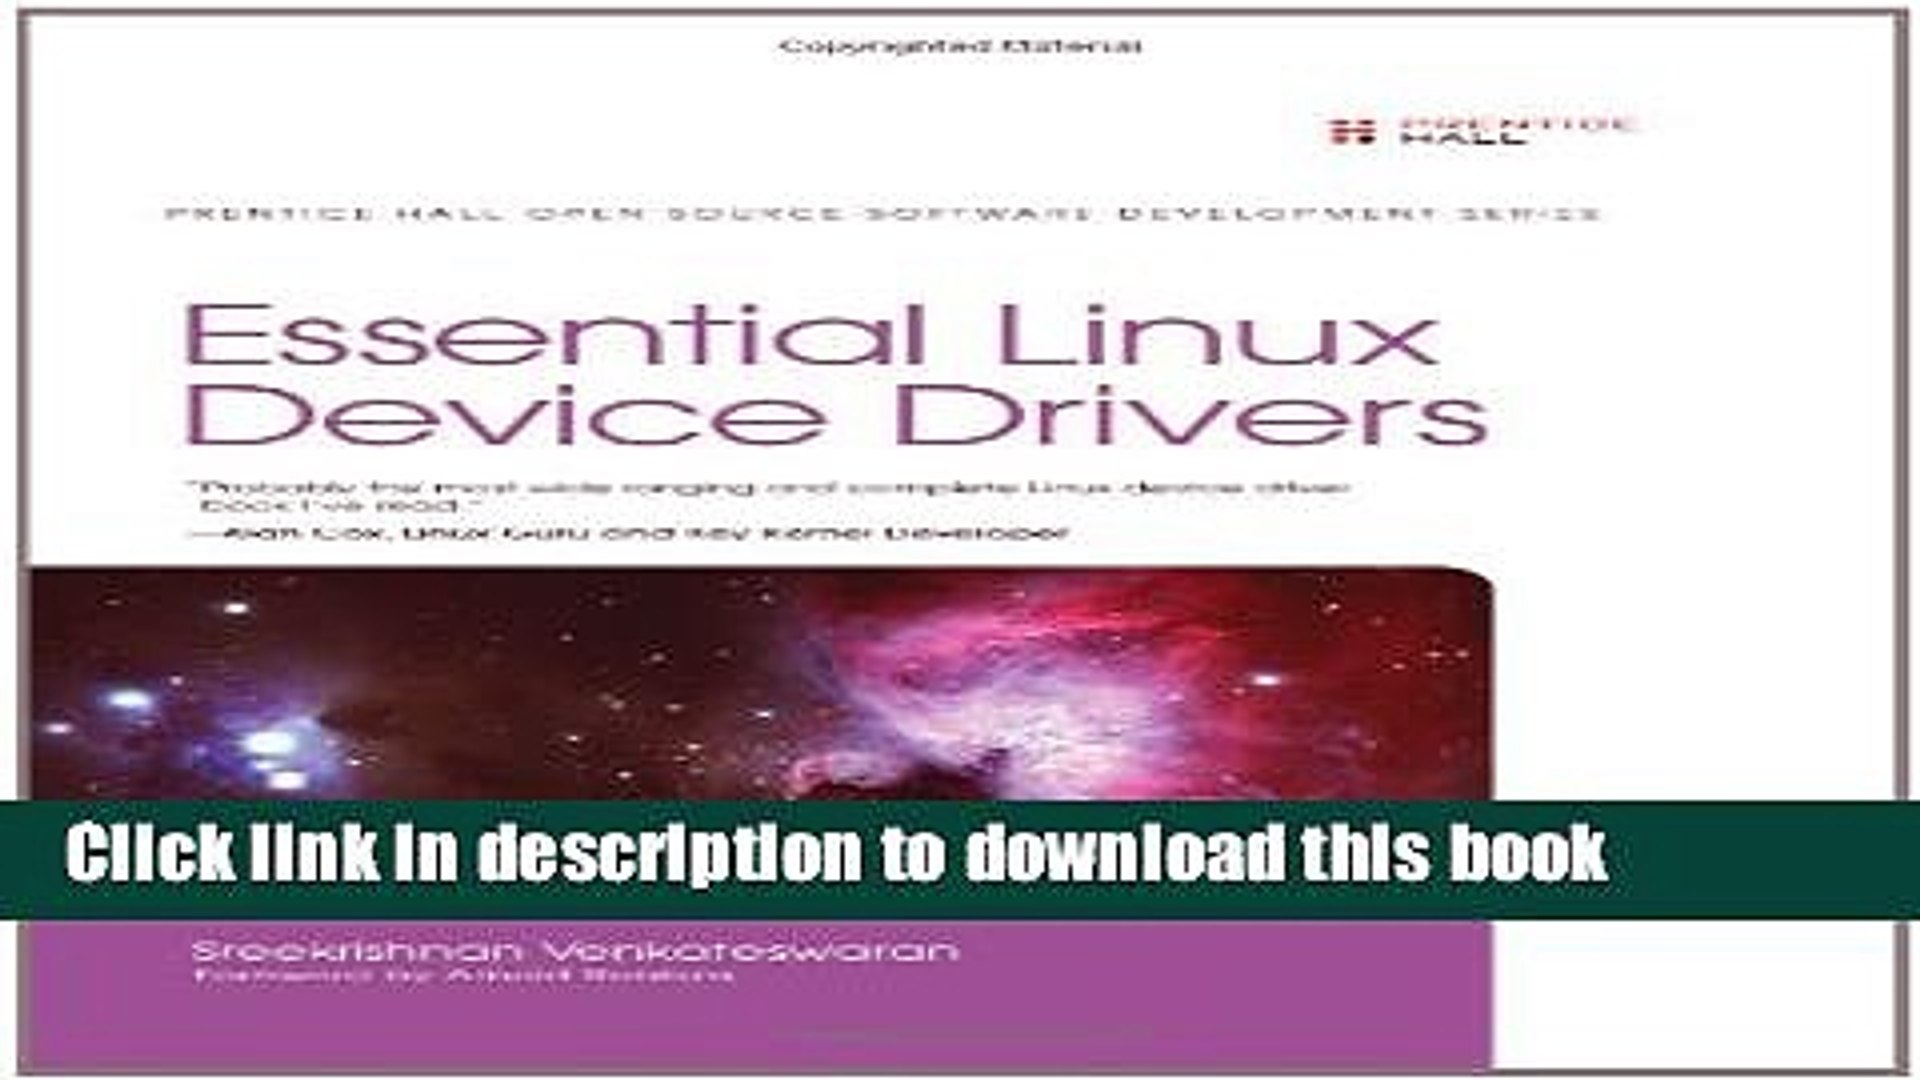 Essential Linux Device Drivers